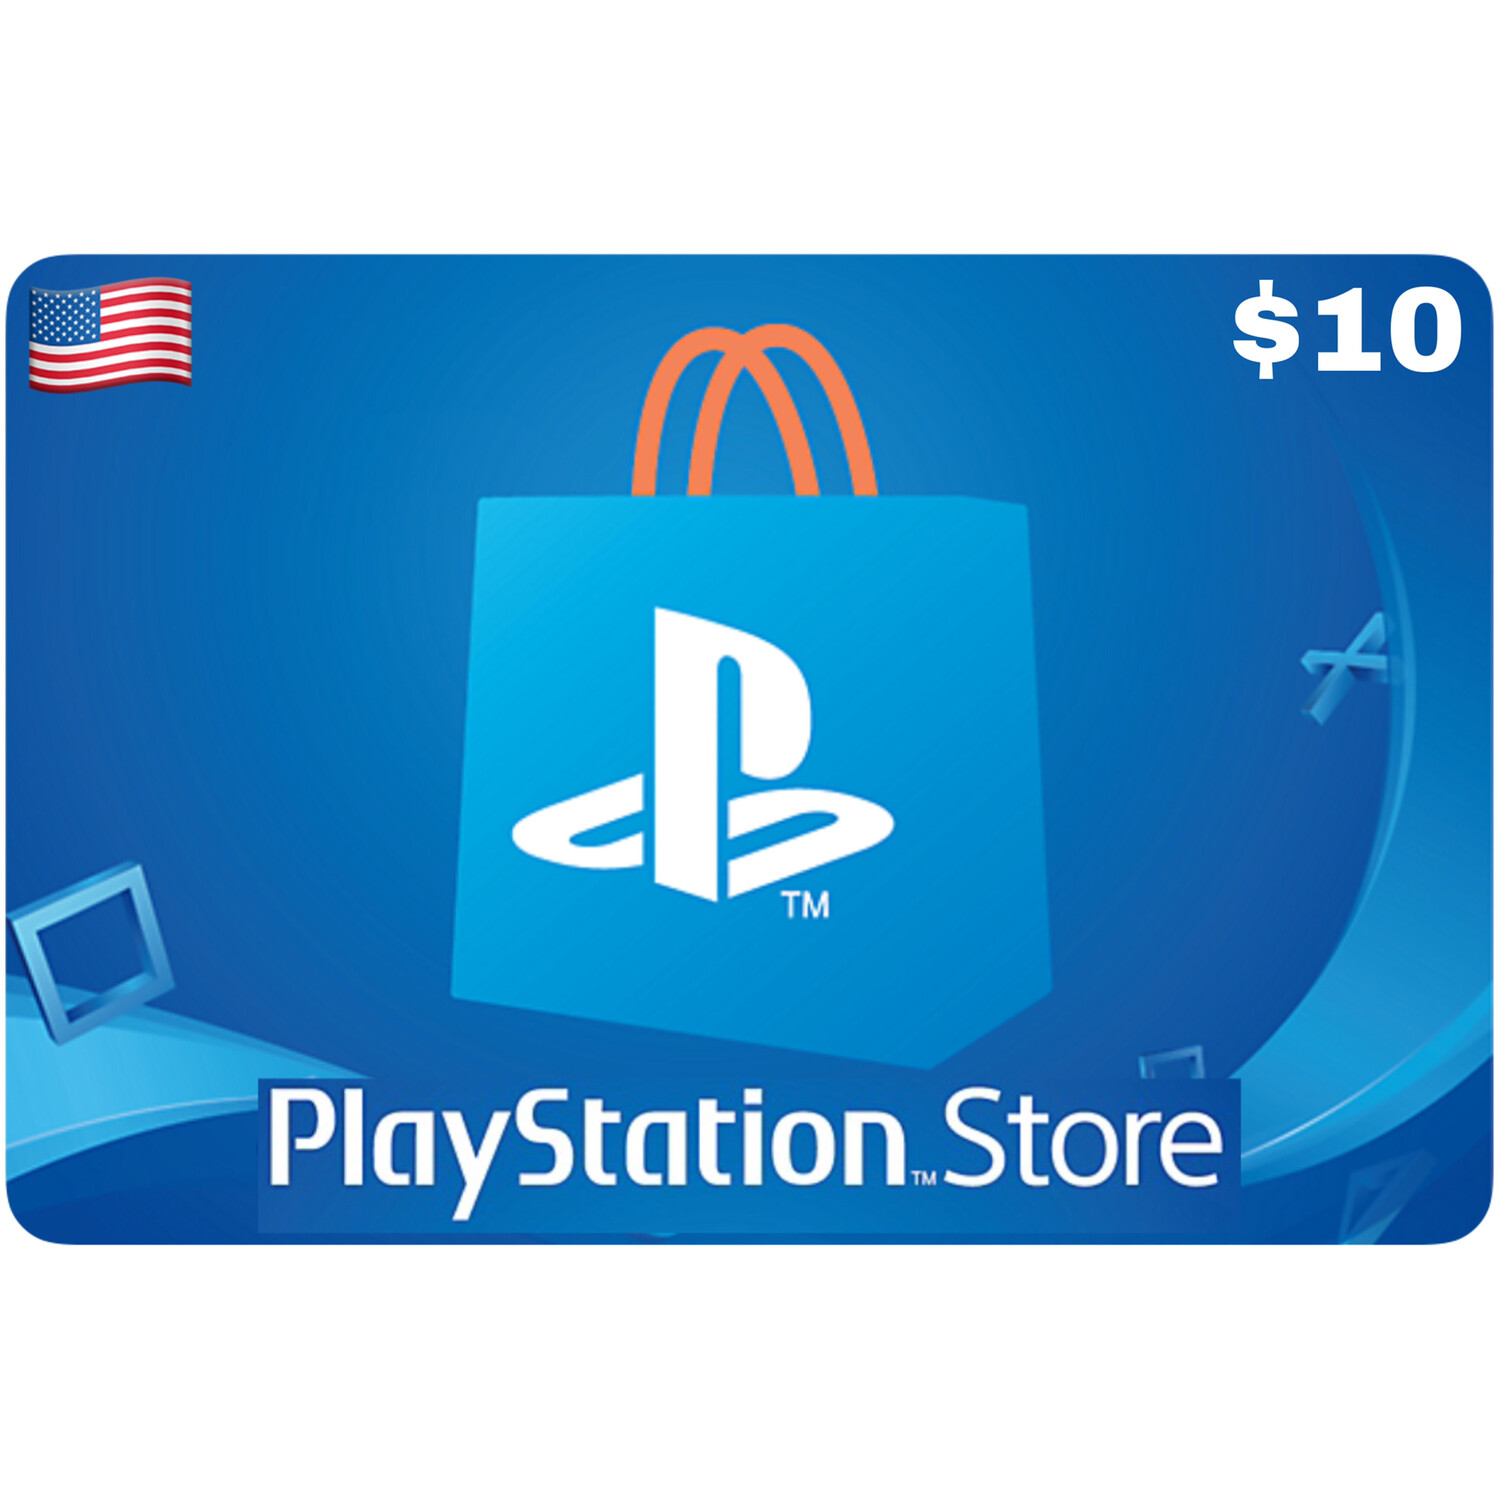 Playstation Store Gift Card US $10